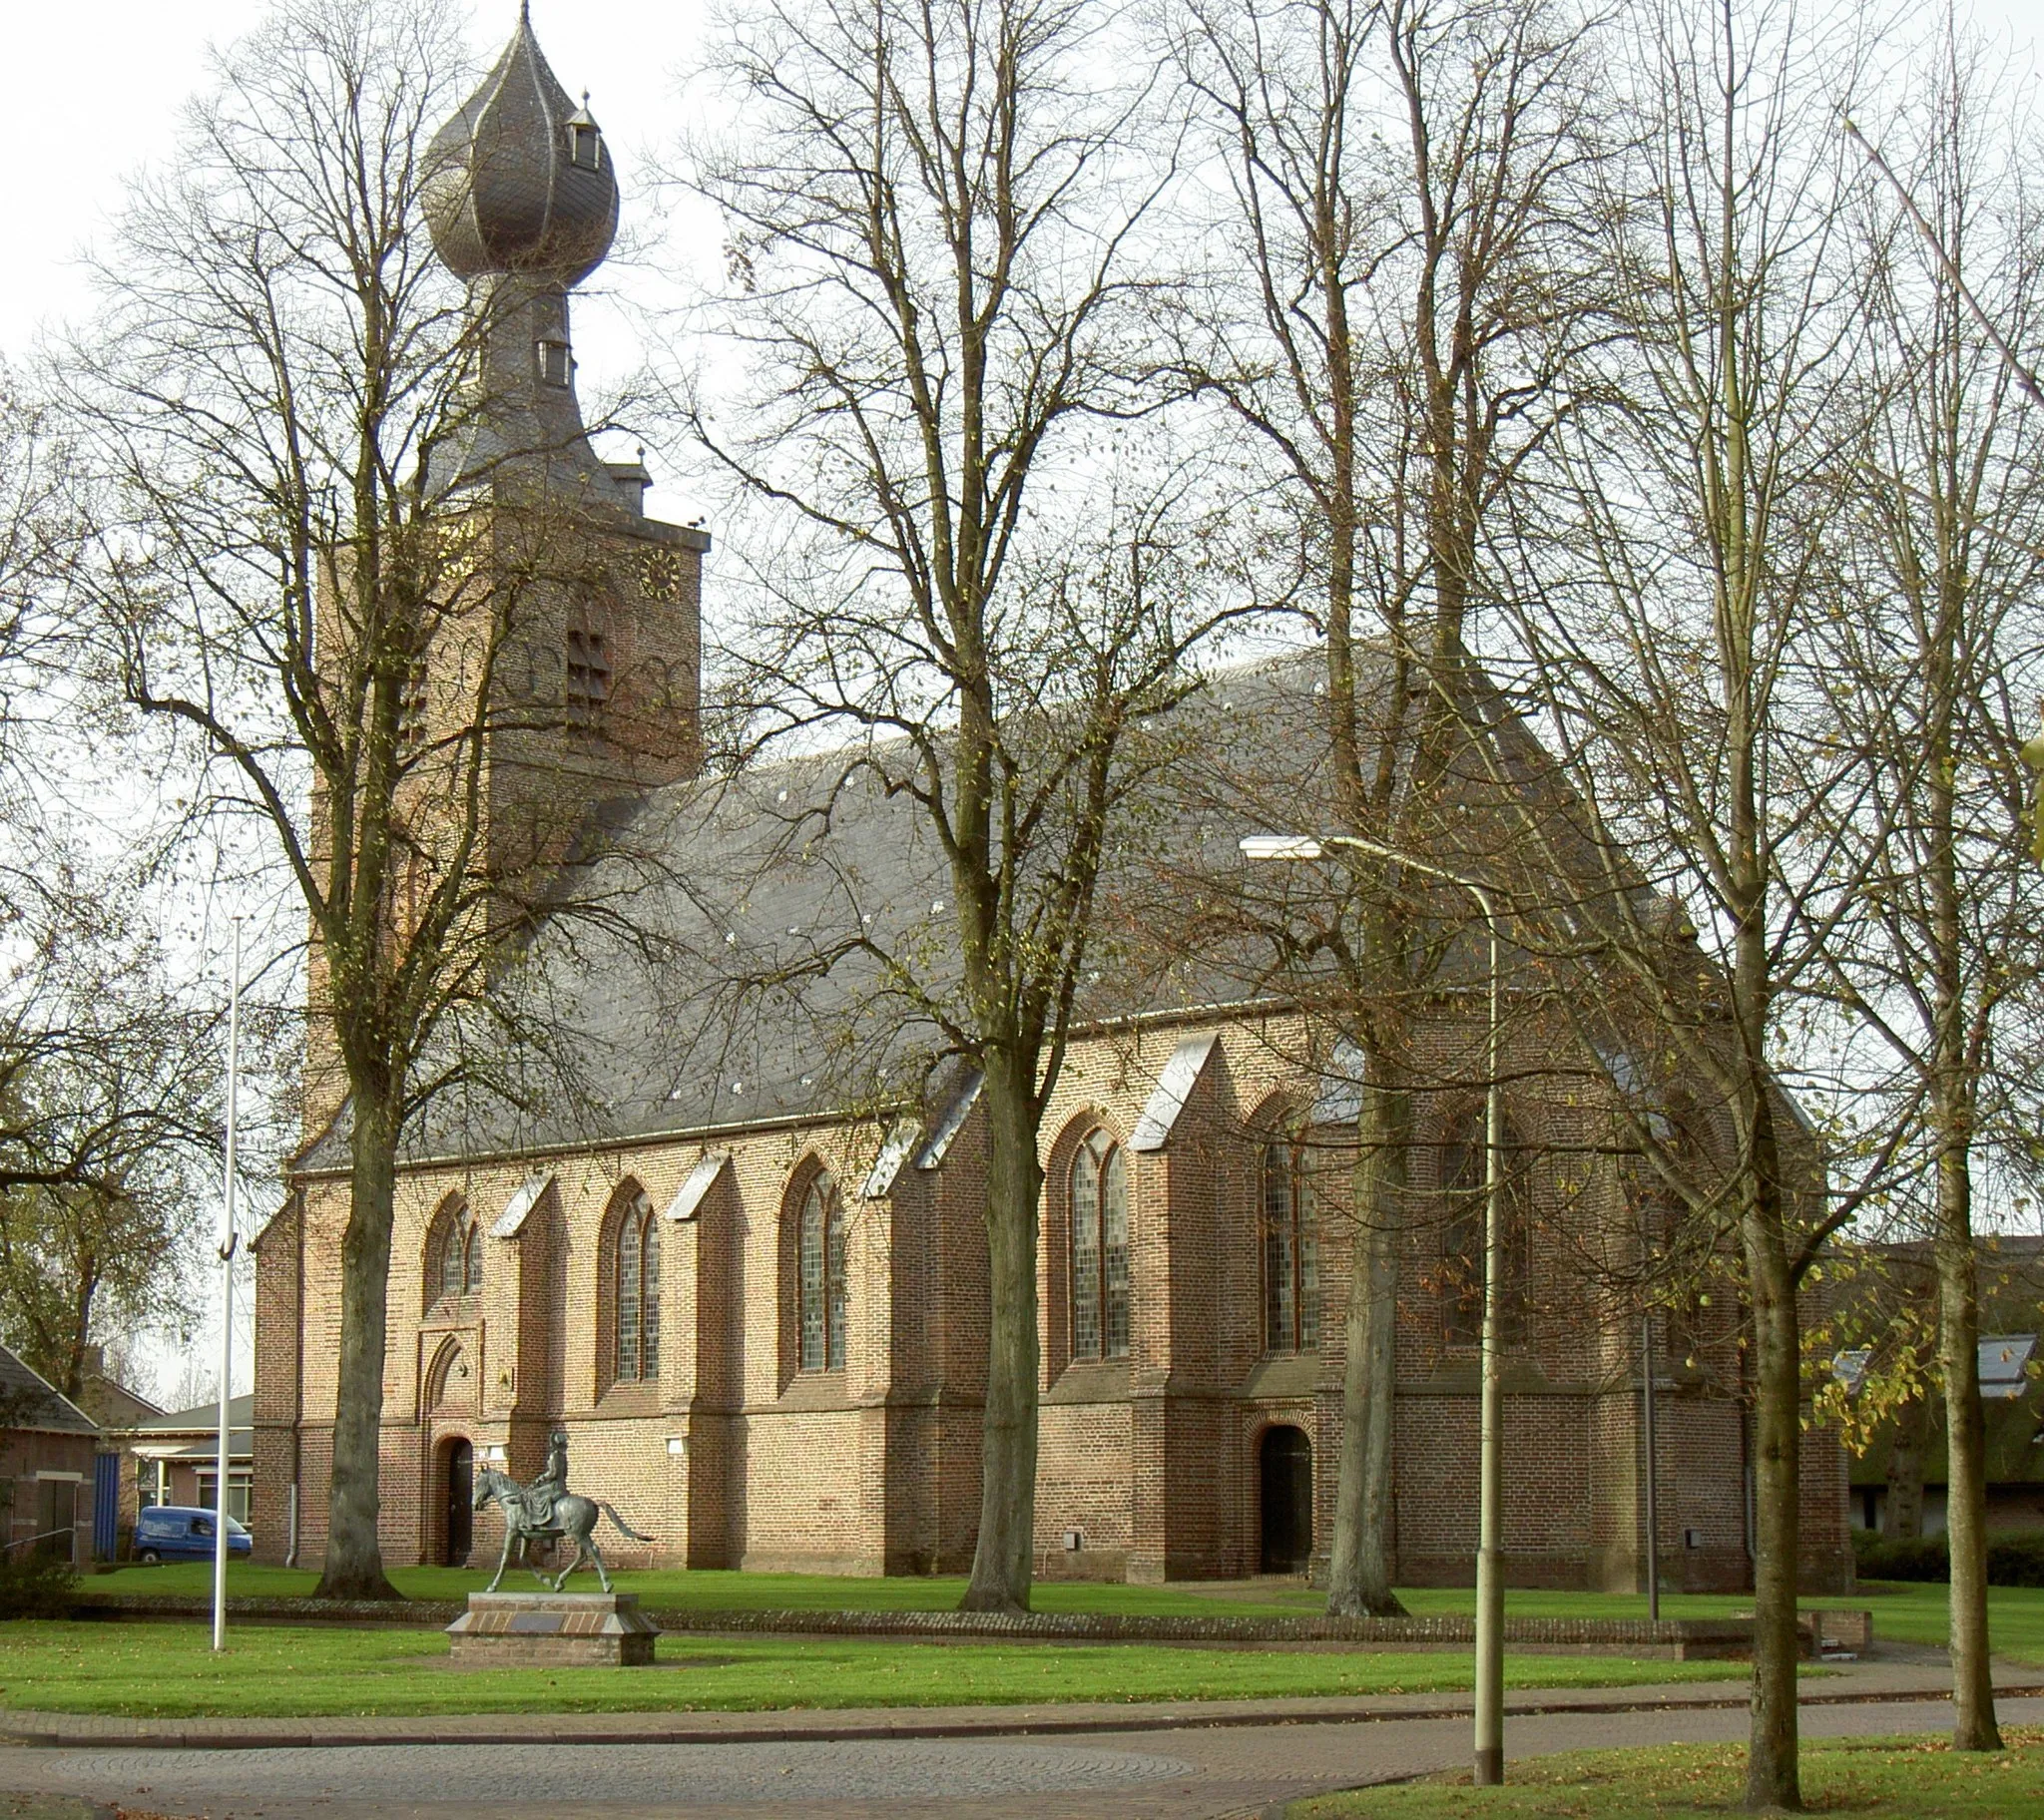 Photo showing: The Dutch Reformed church of Dwingeloo, with its characteristic top. On the foreground also the statue of the 'Juffertje van Batinghe'.